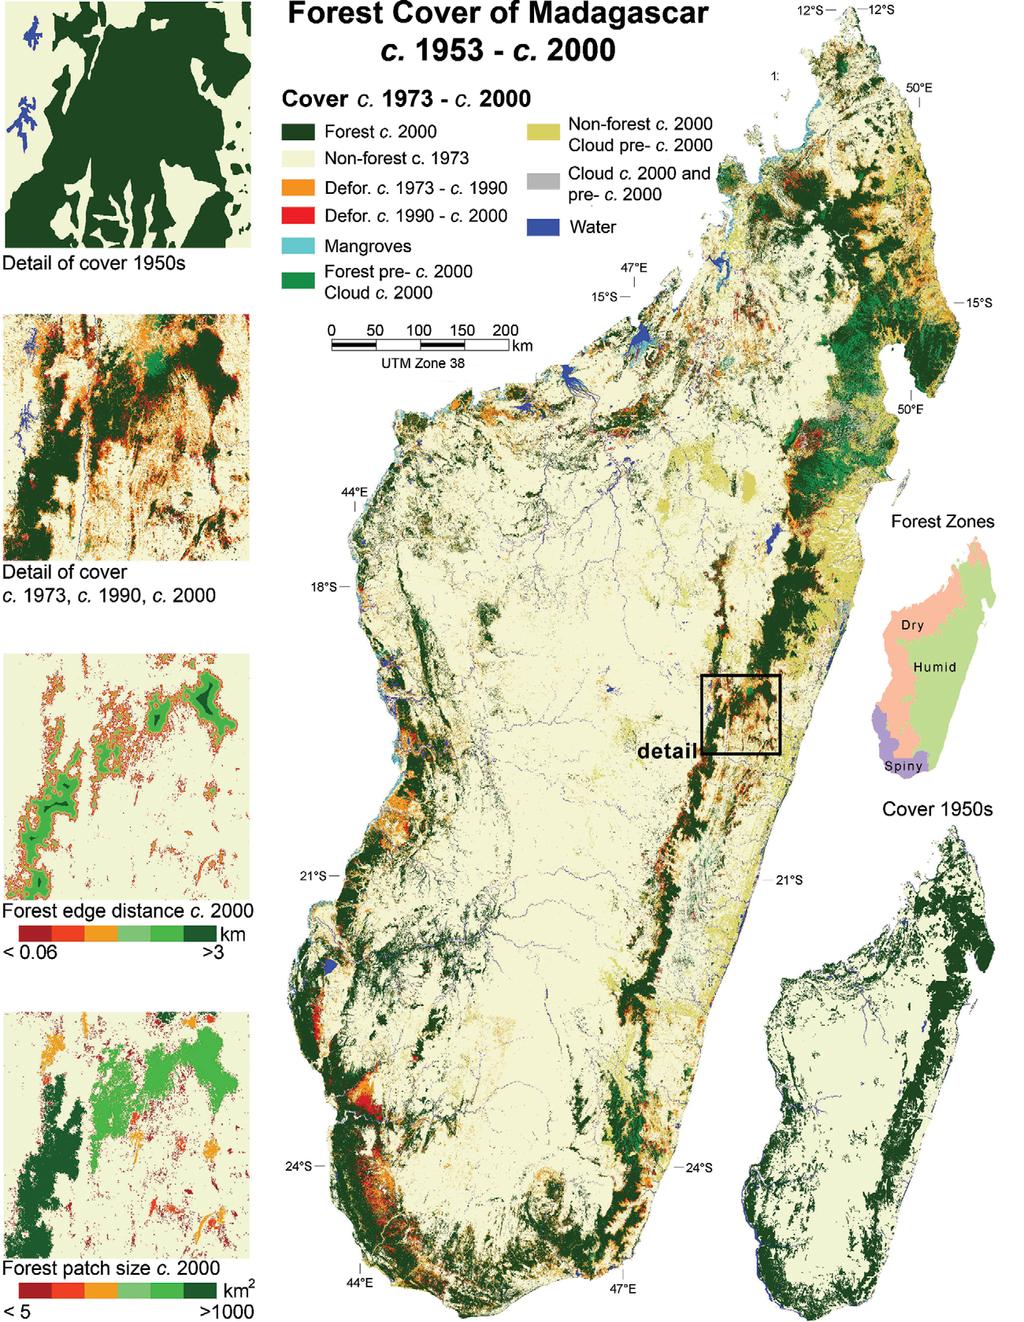 Figure 5. Madagascar forest cover from the 1950s to c. 2000. Forest cover changes from the 1970s to c.